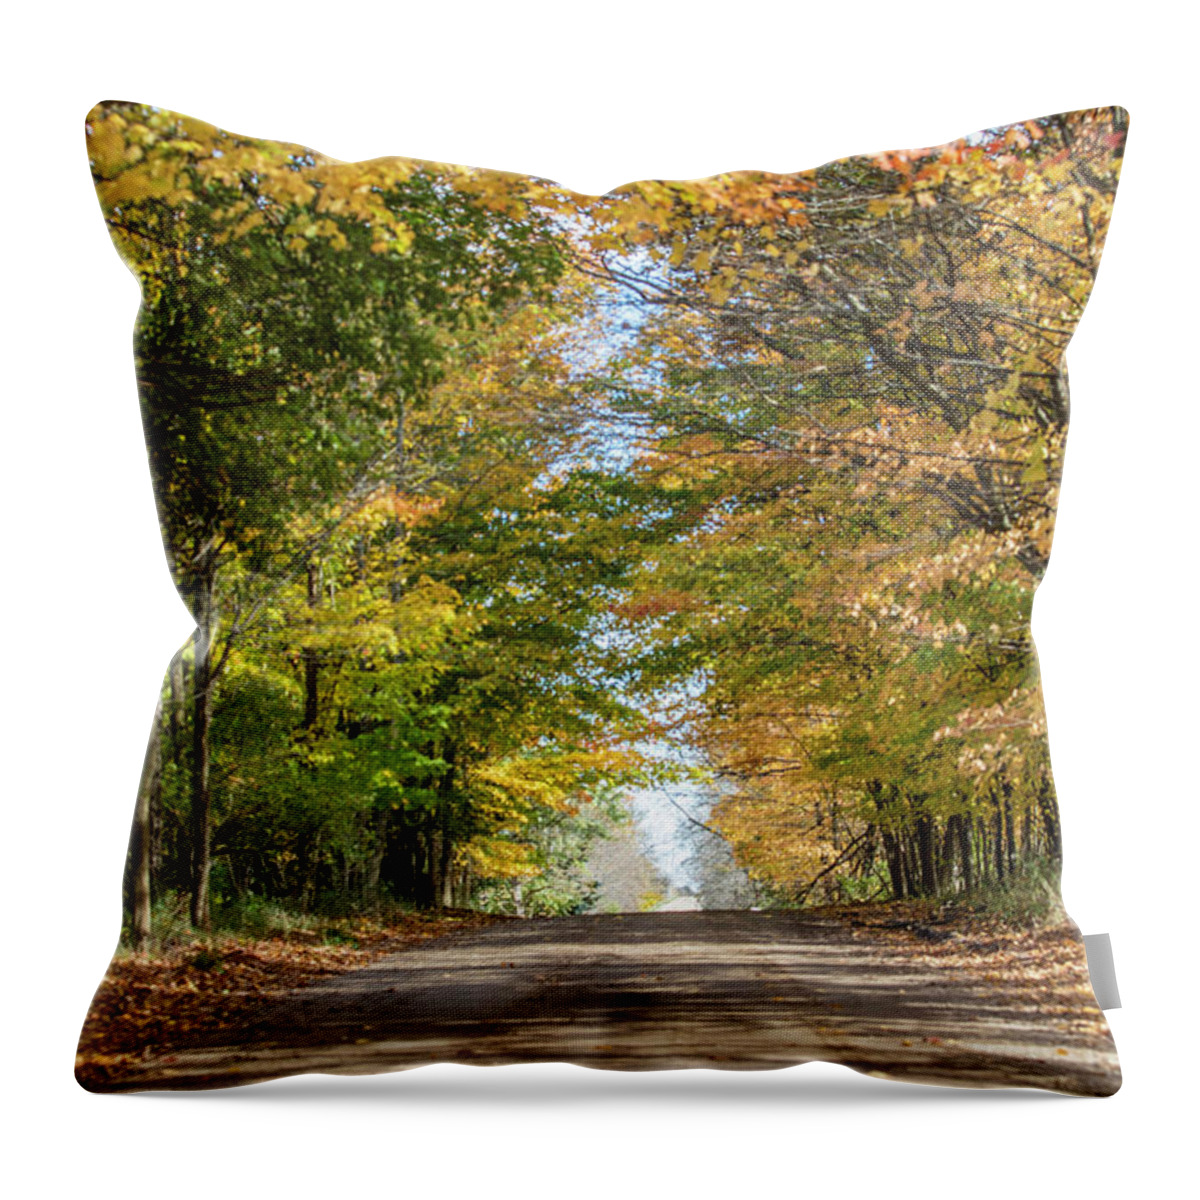 Autumn Throw Pillow featuring the photograph Autumn Backroad by John McGraw